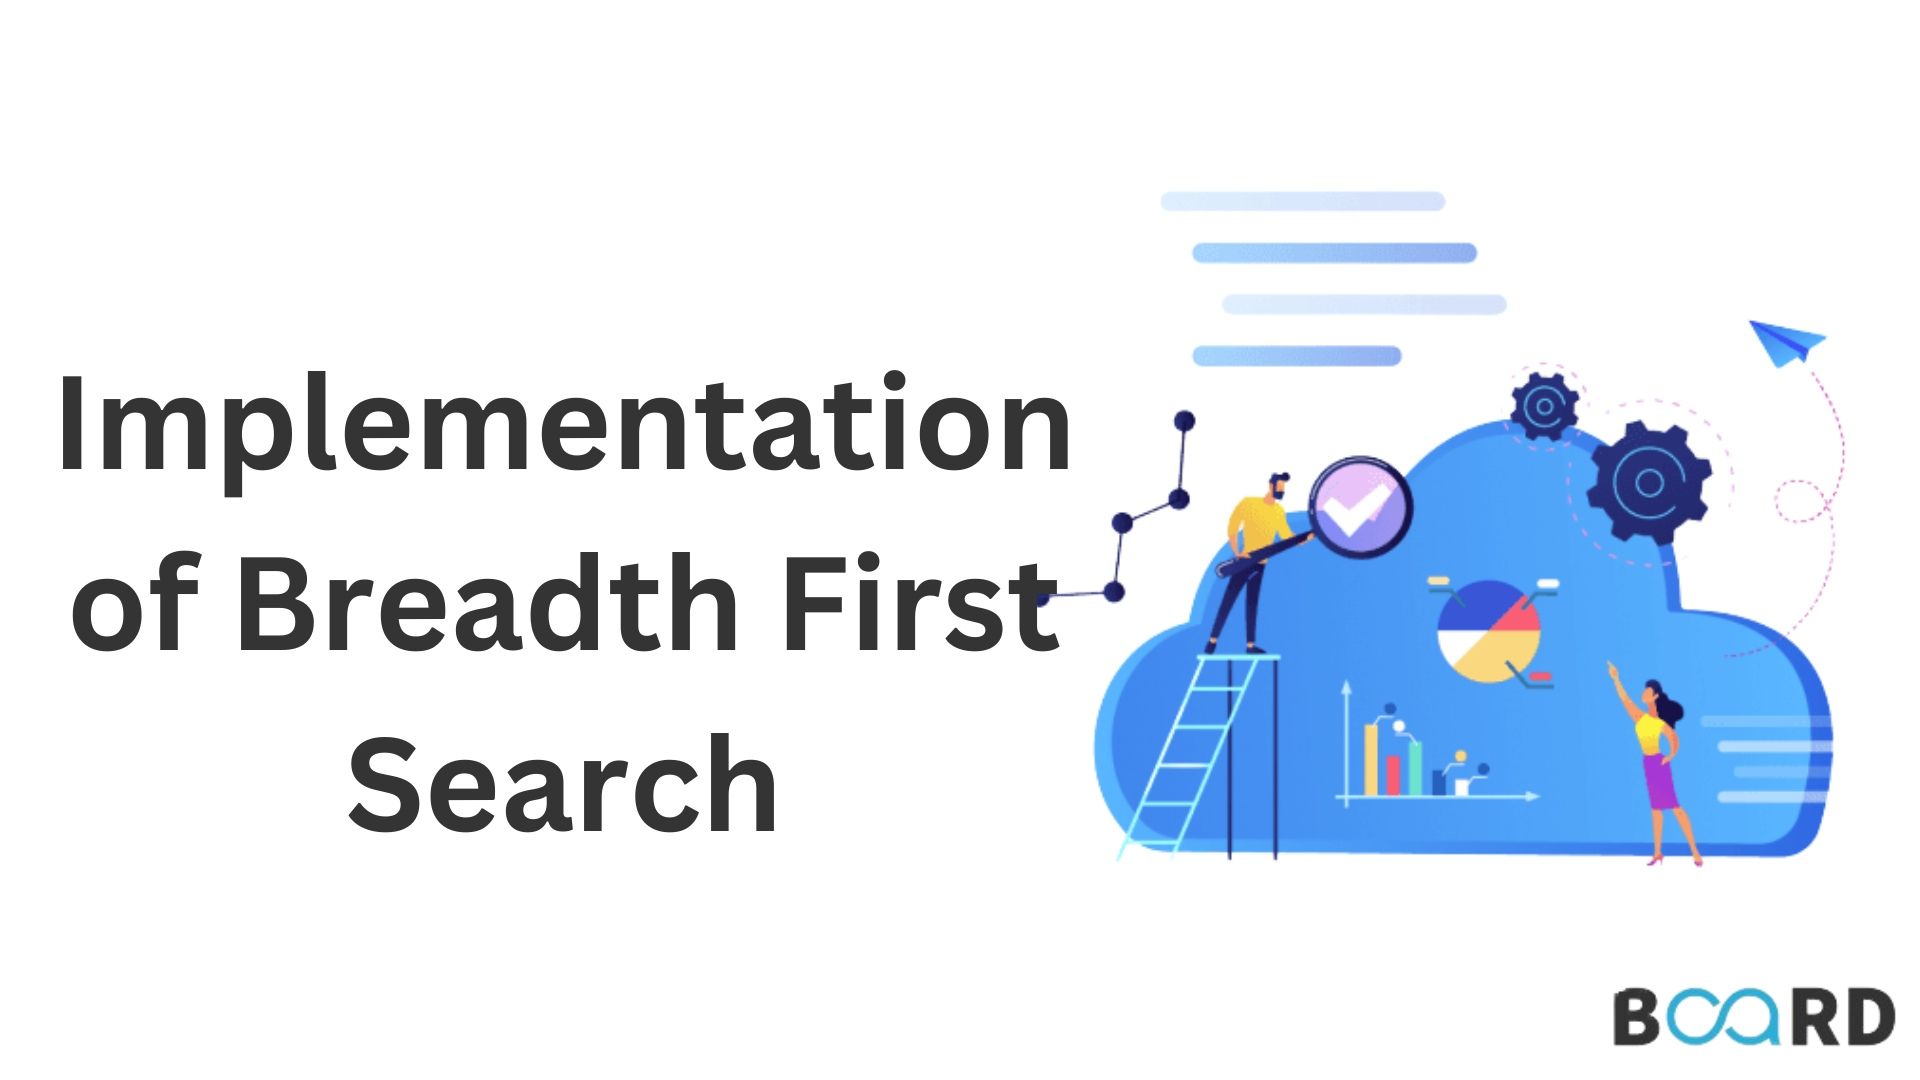 A Quick Guide to Breadth-First Search